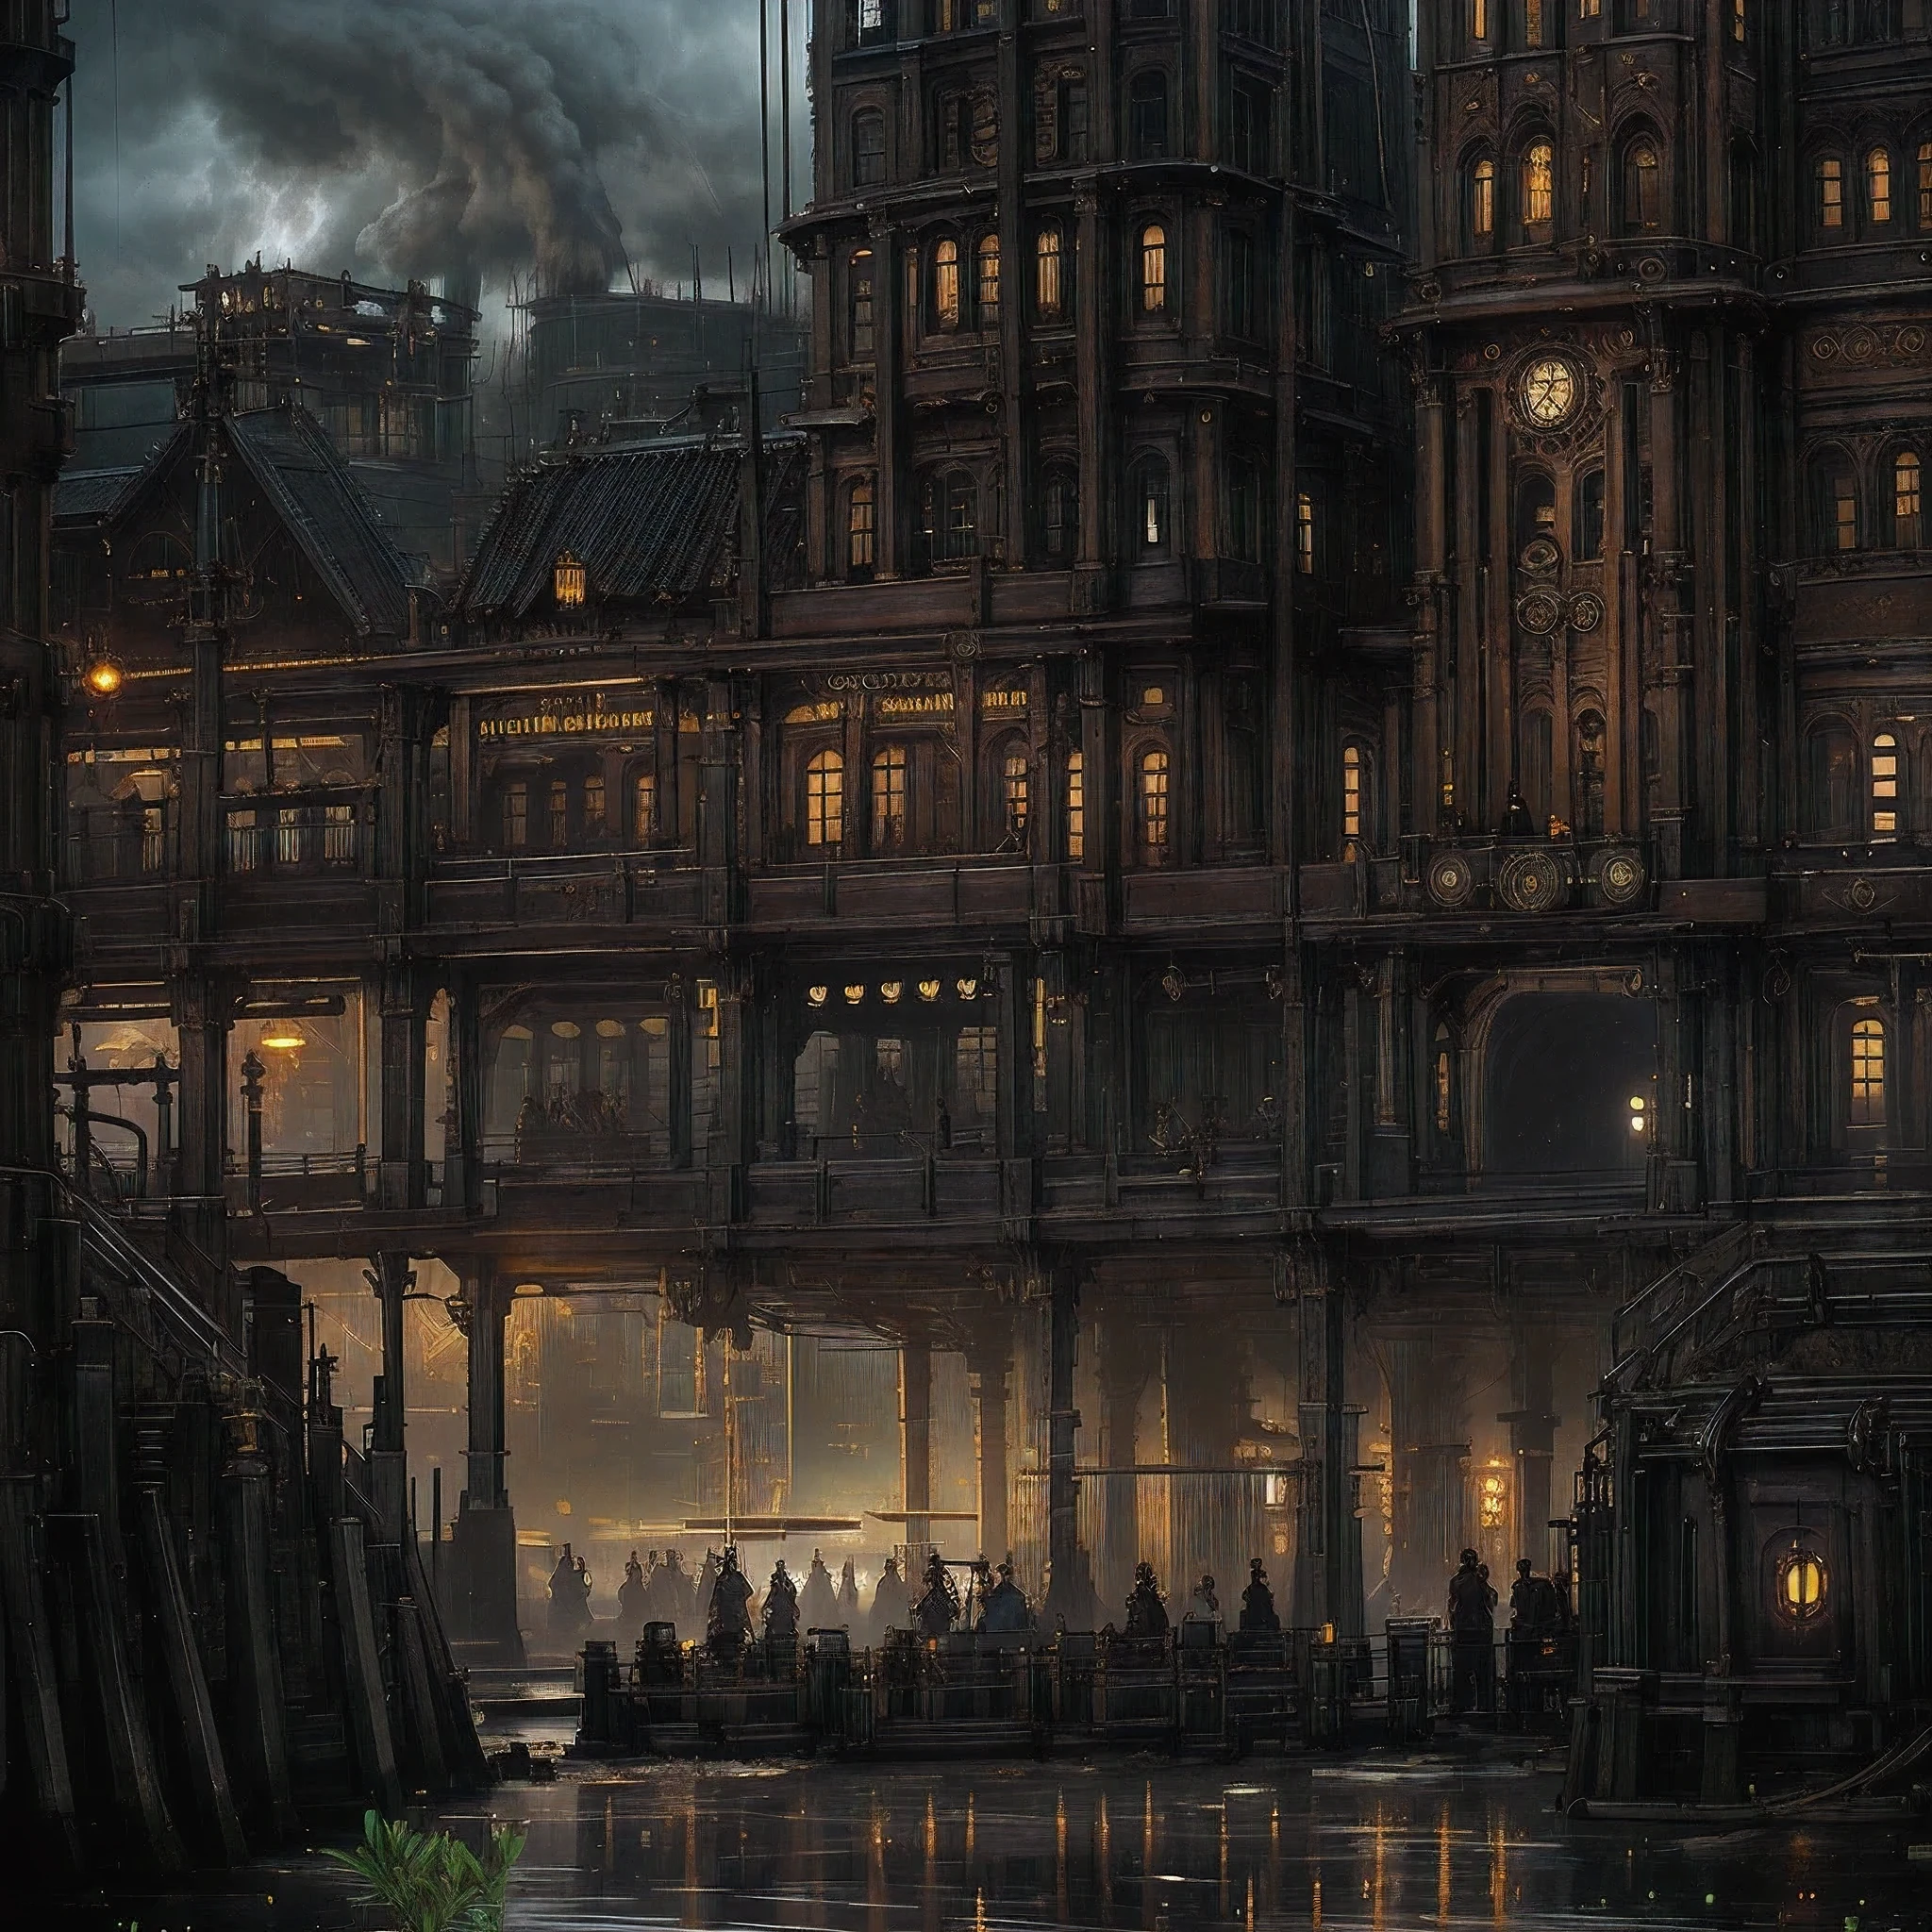 (((steampunk))),city,(((crowded buildings))),exposed gears and pipes,(((dim light))),submerged ground,((gears)),((thick pipes)),covered bridge,The perspective is from the bottom up, reflecting the height of the building,dark weather,smoking chimneys,(((mechanical devices))),((staggered wires)),crowded city,irregular buildings